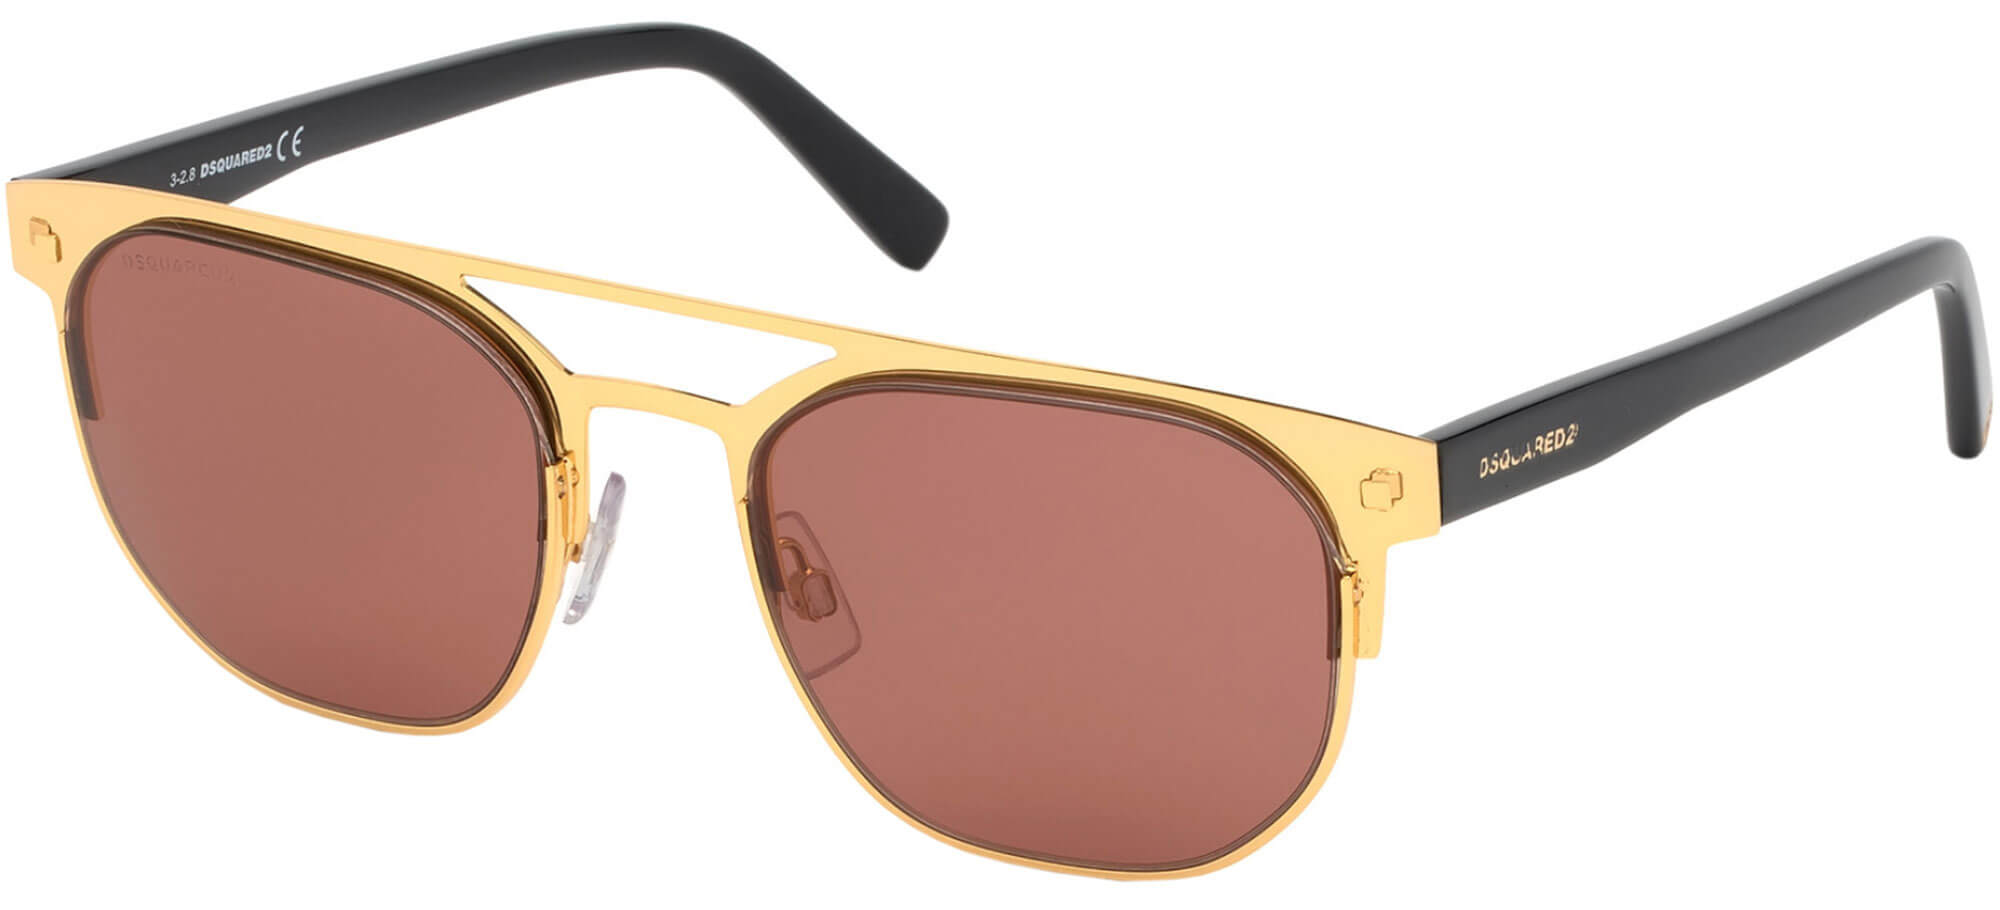 Dsquared2JOEY DQ 0318Gold/red (30S A)